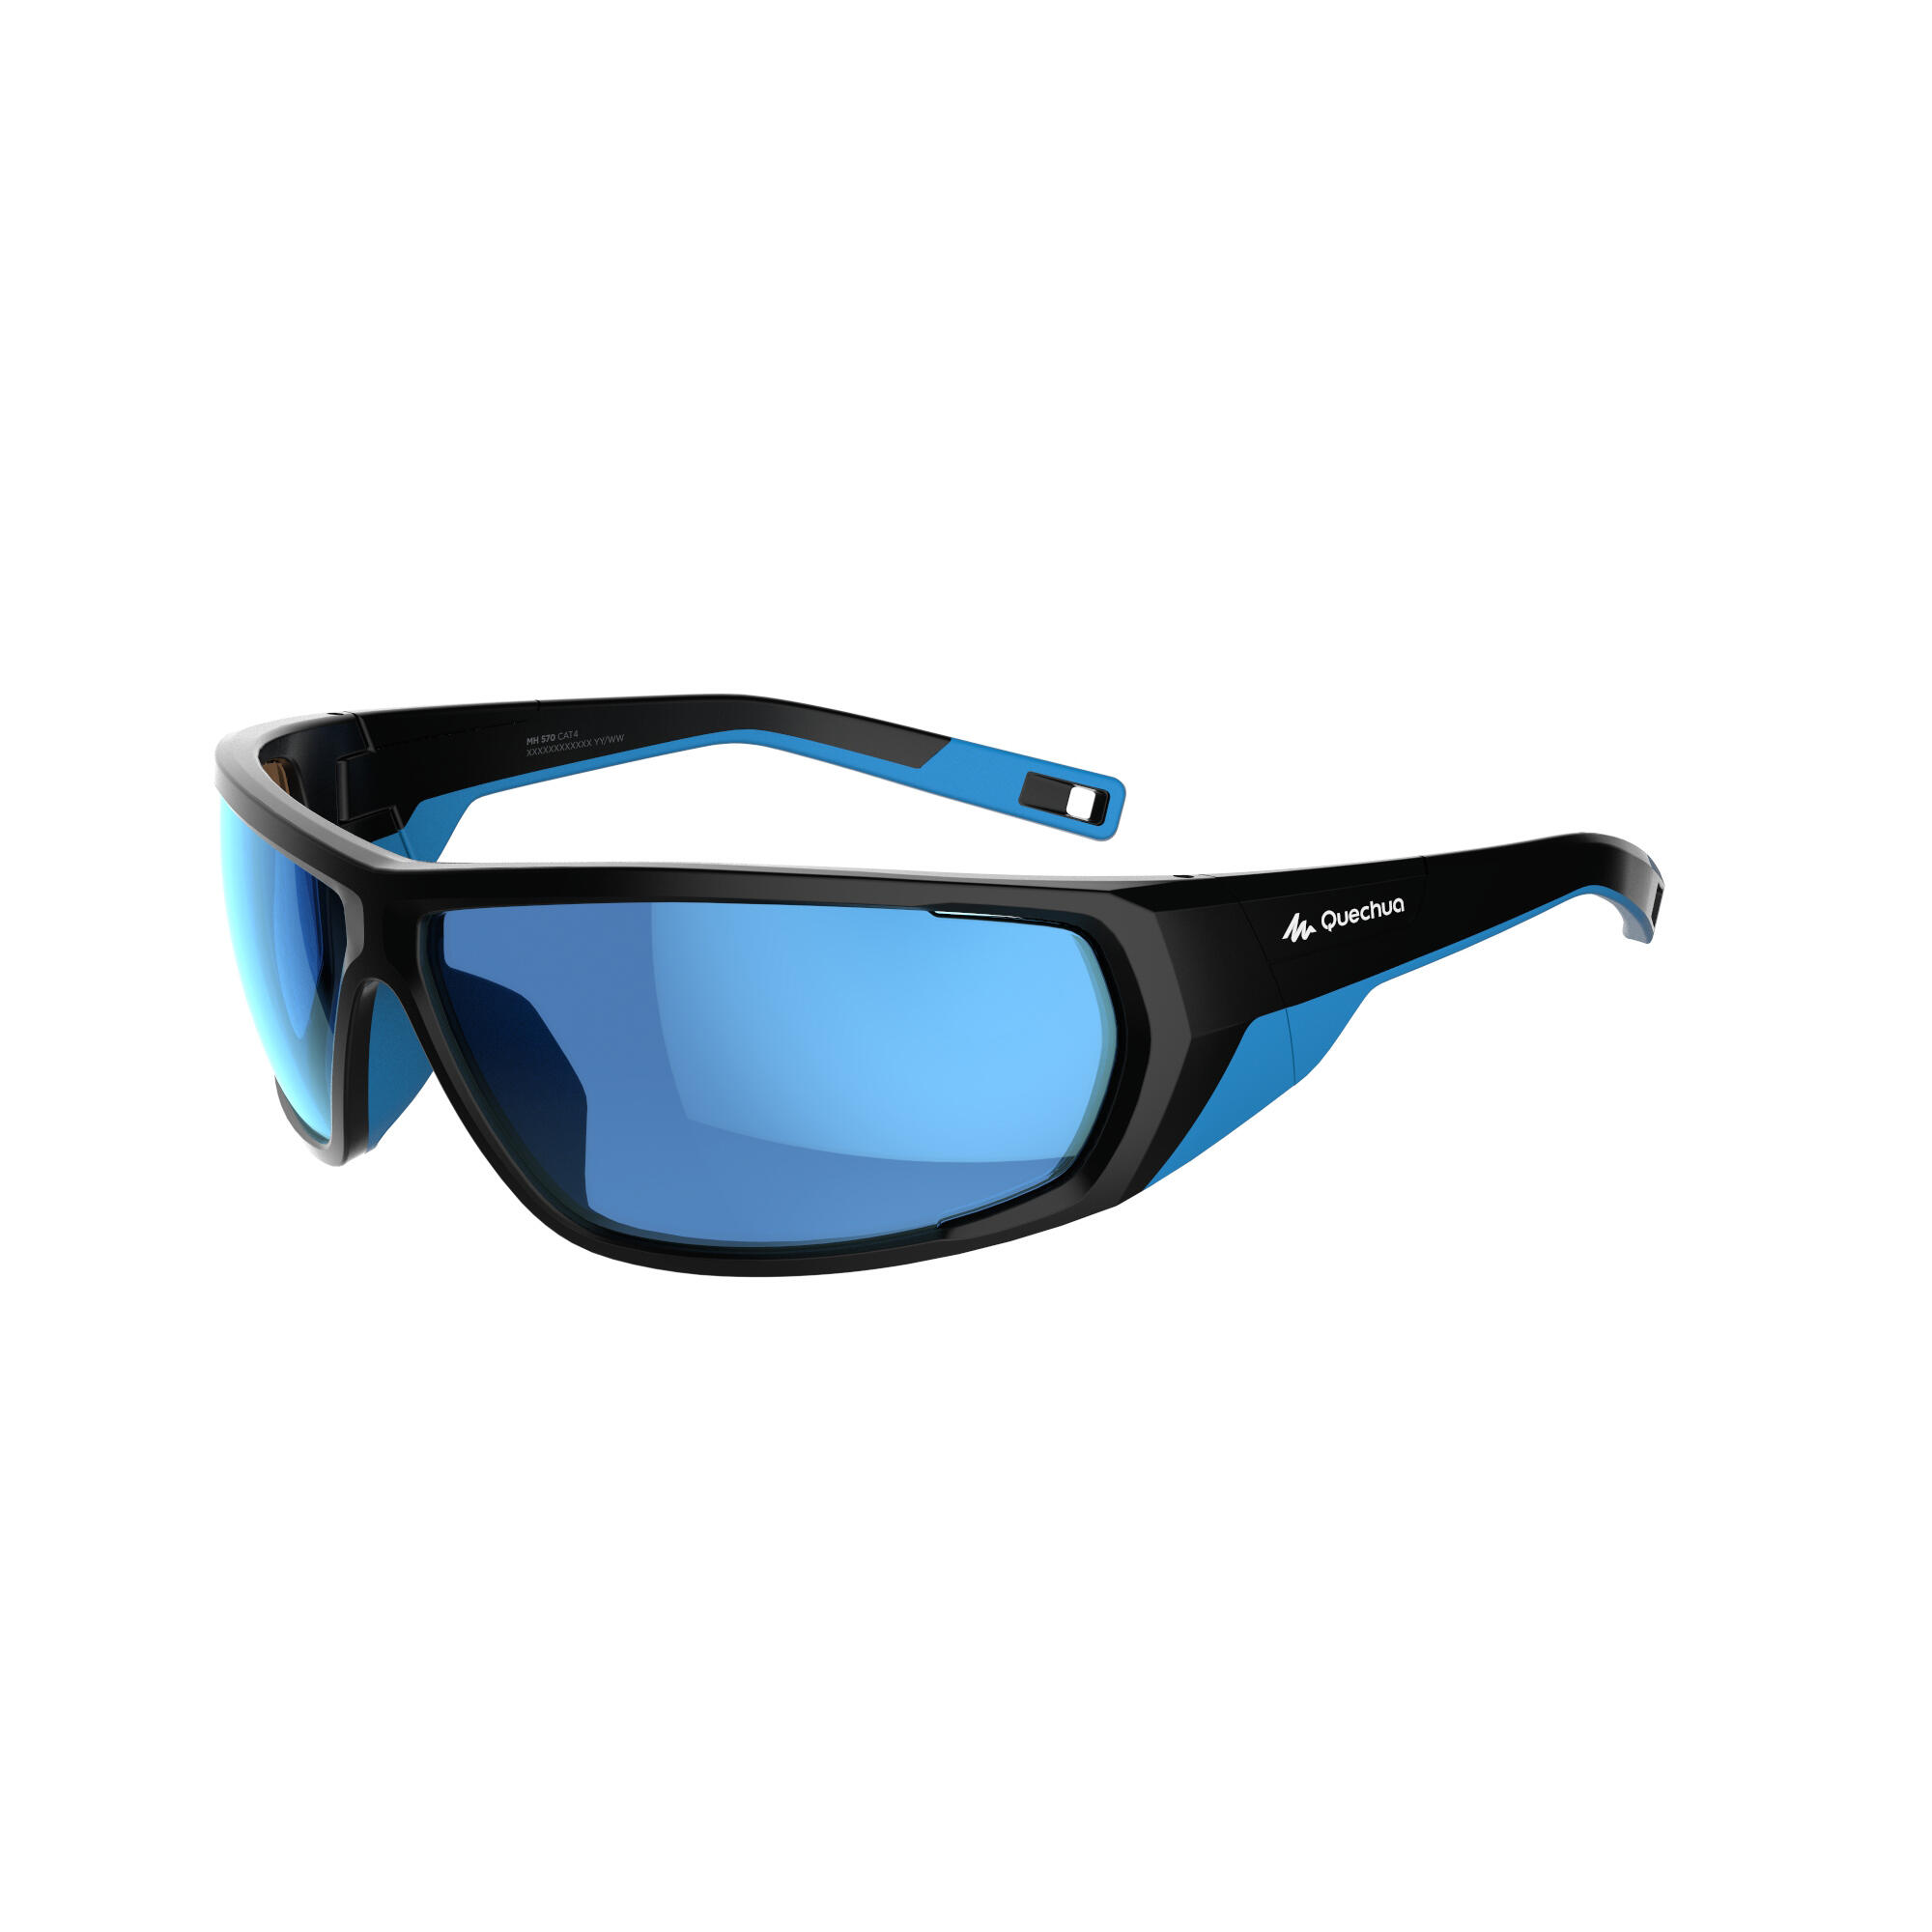 Mountain Sunglasses Online In India 